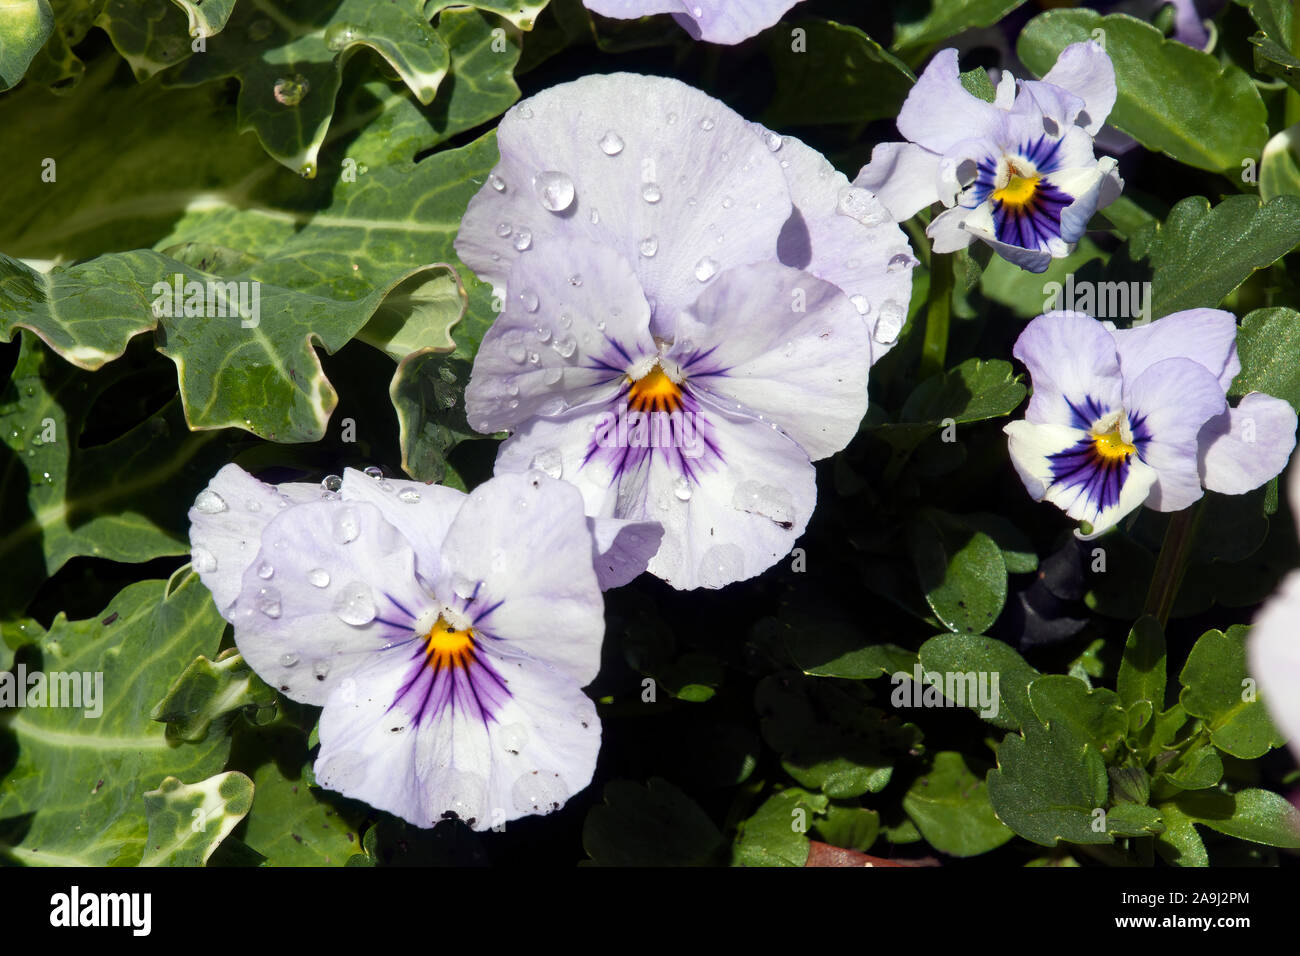 Sydney Australia, flowerbed with mauve pansies after rain Stock Photo